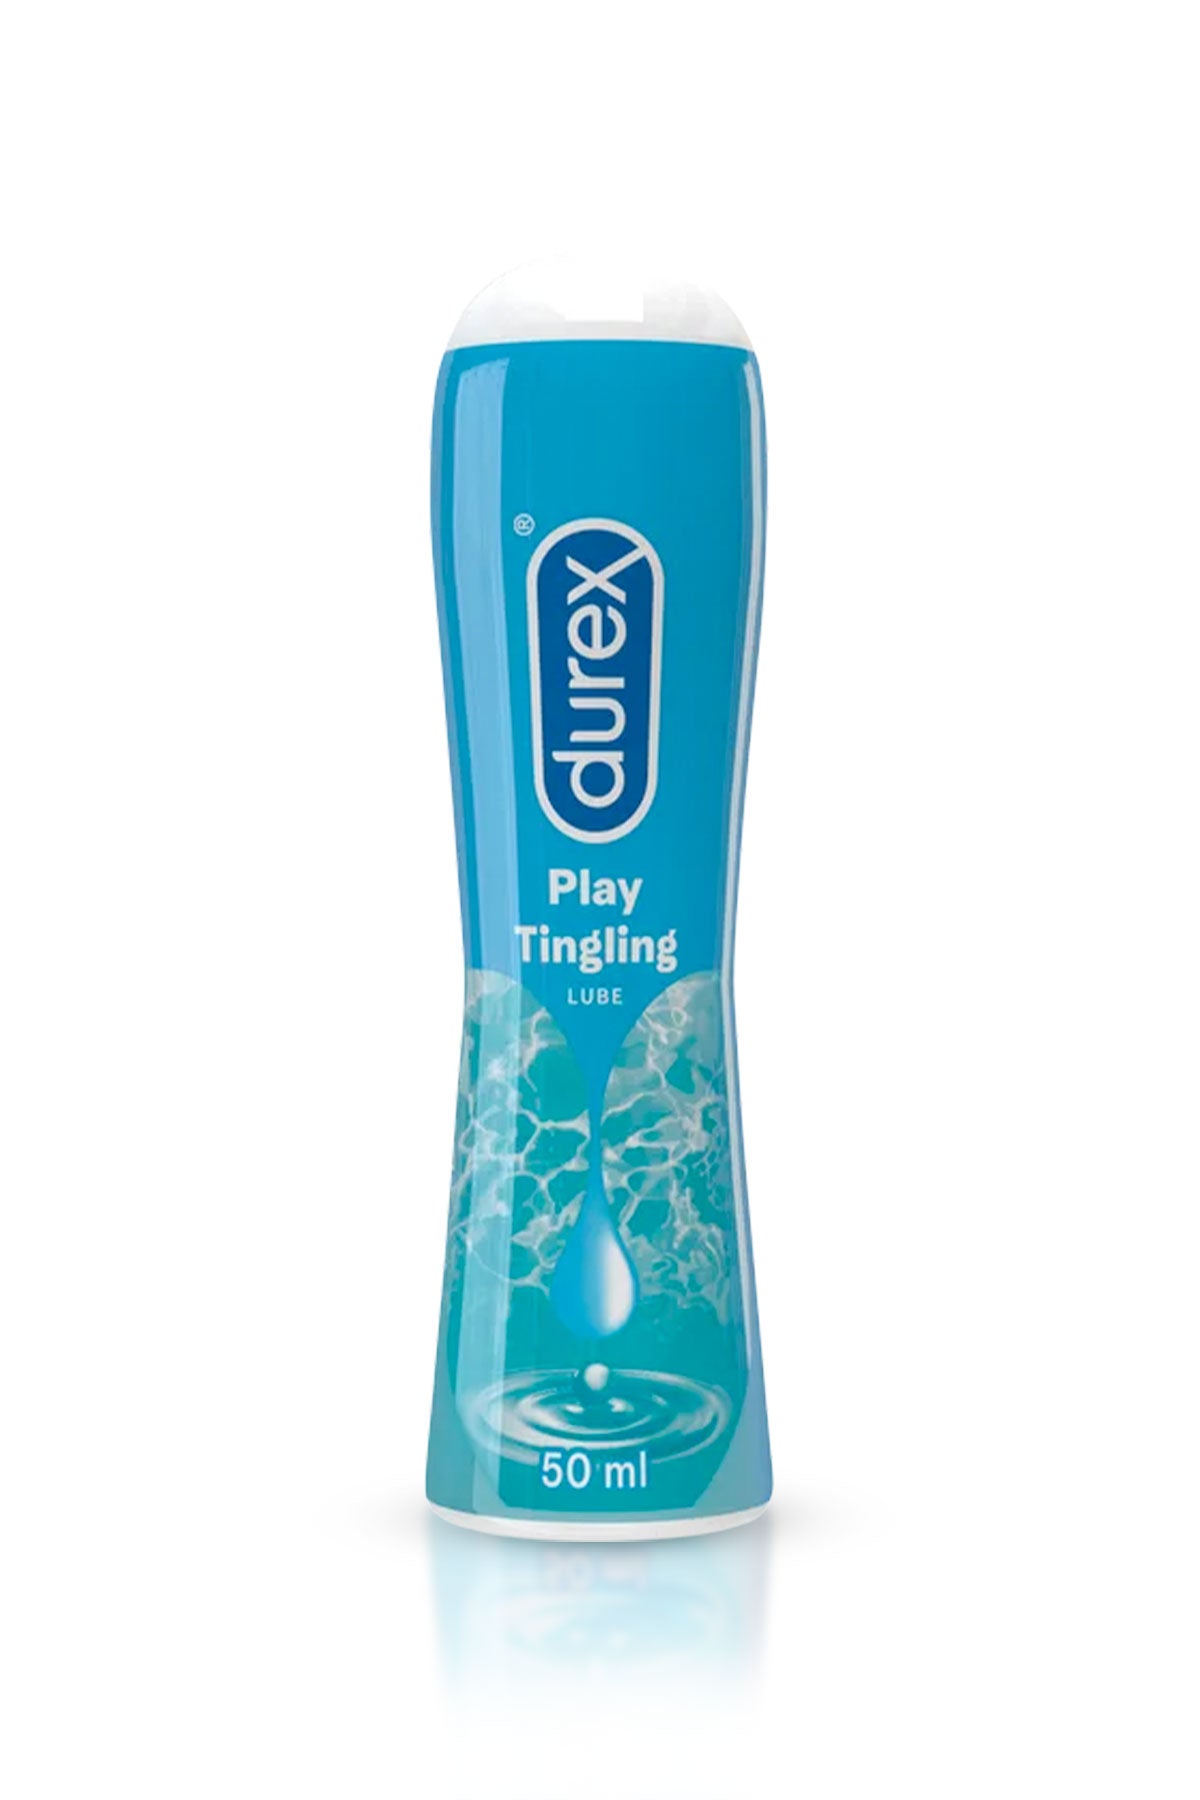 Play Tingling Lube by Durex